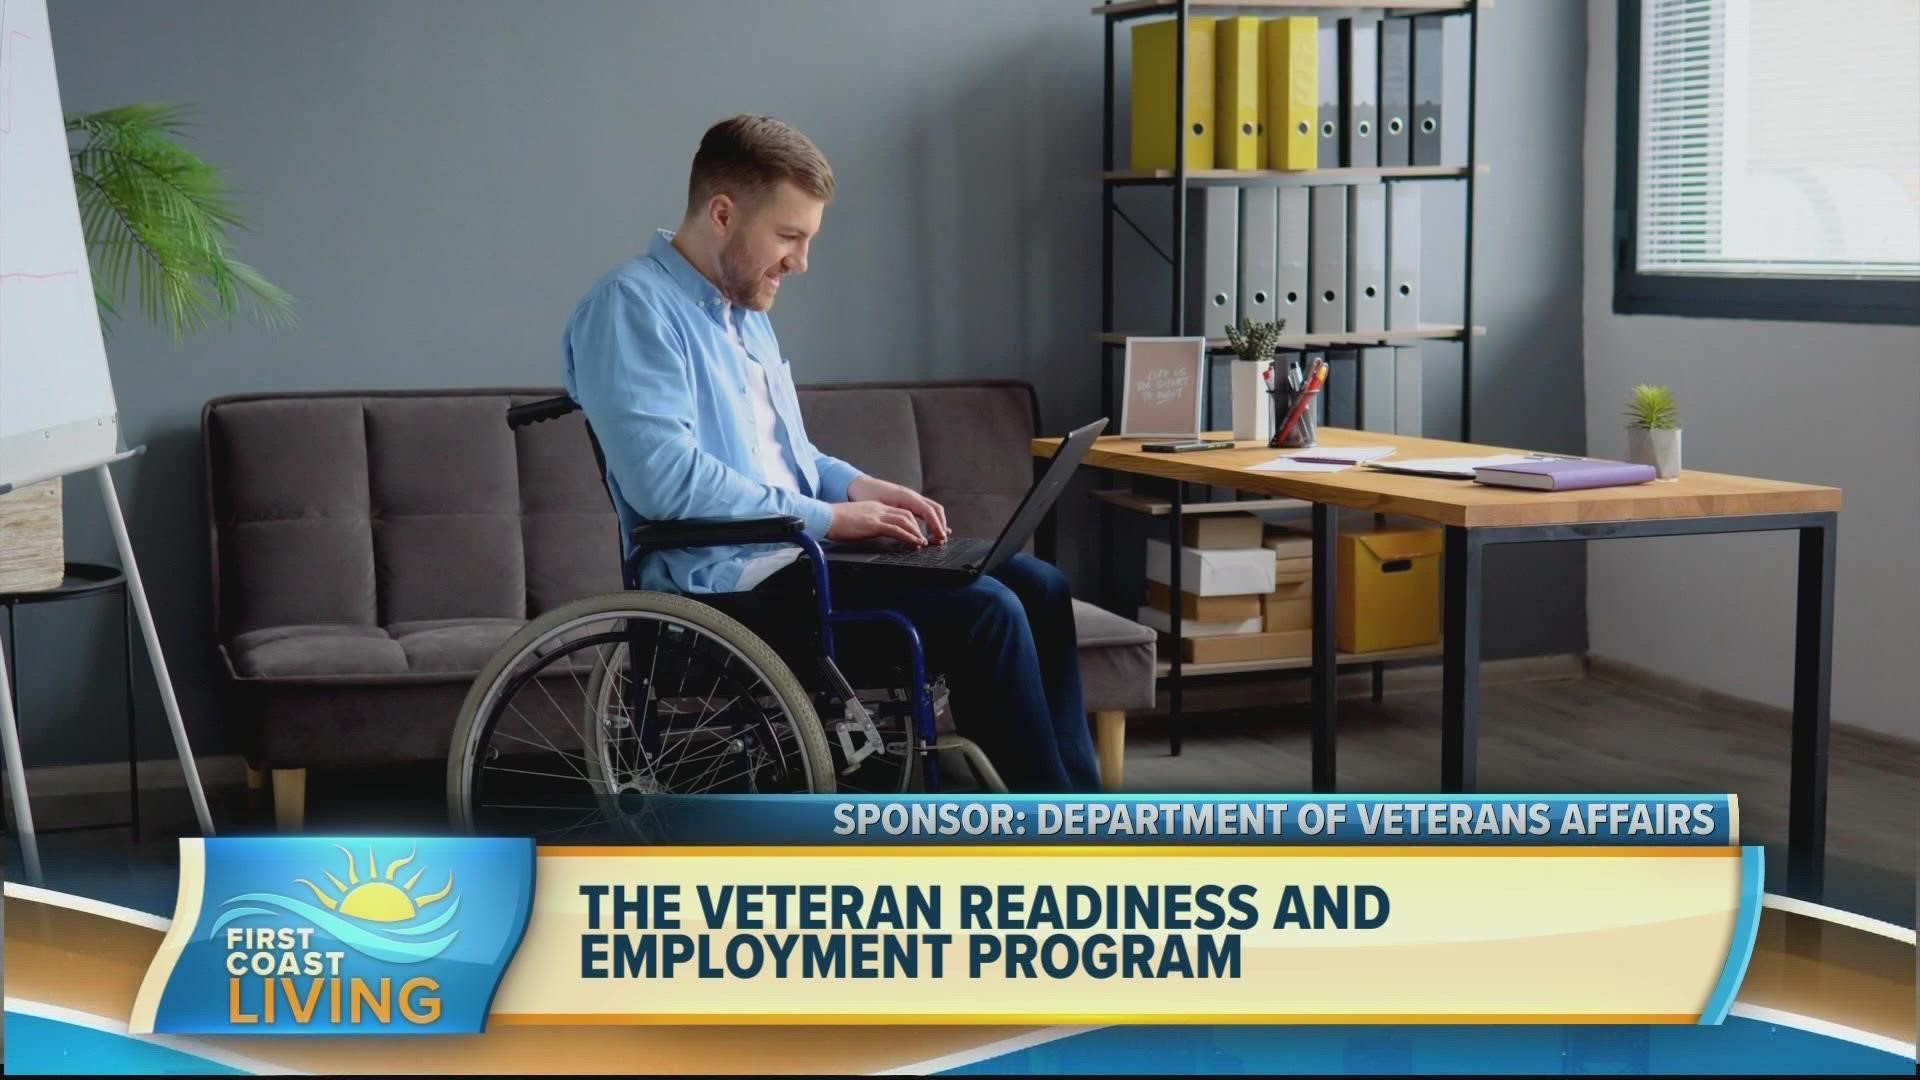 VR&E's new executive director, Nick Pamperin shares information on The Veterans Benefits Administration’s Veteran Readiness and Employment (VR&E) program.